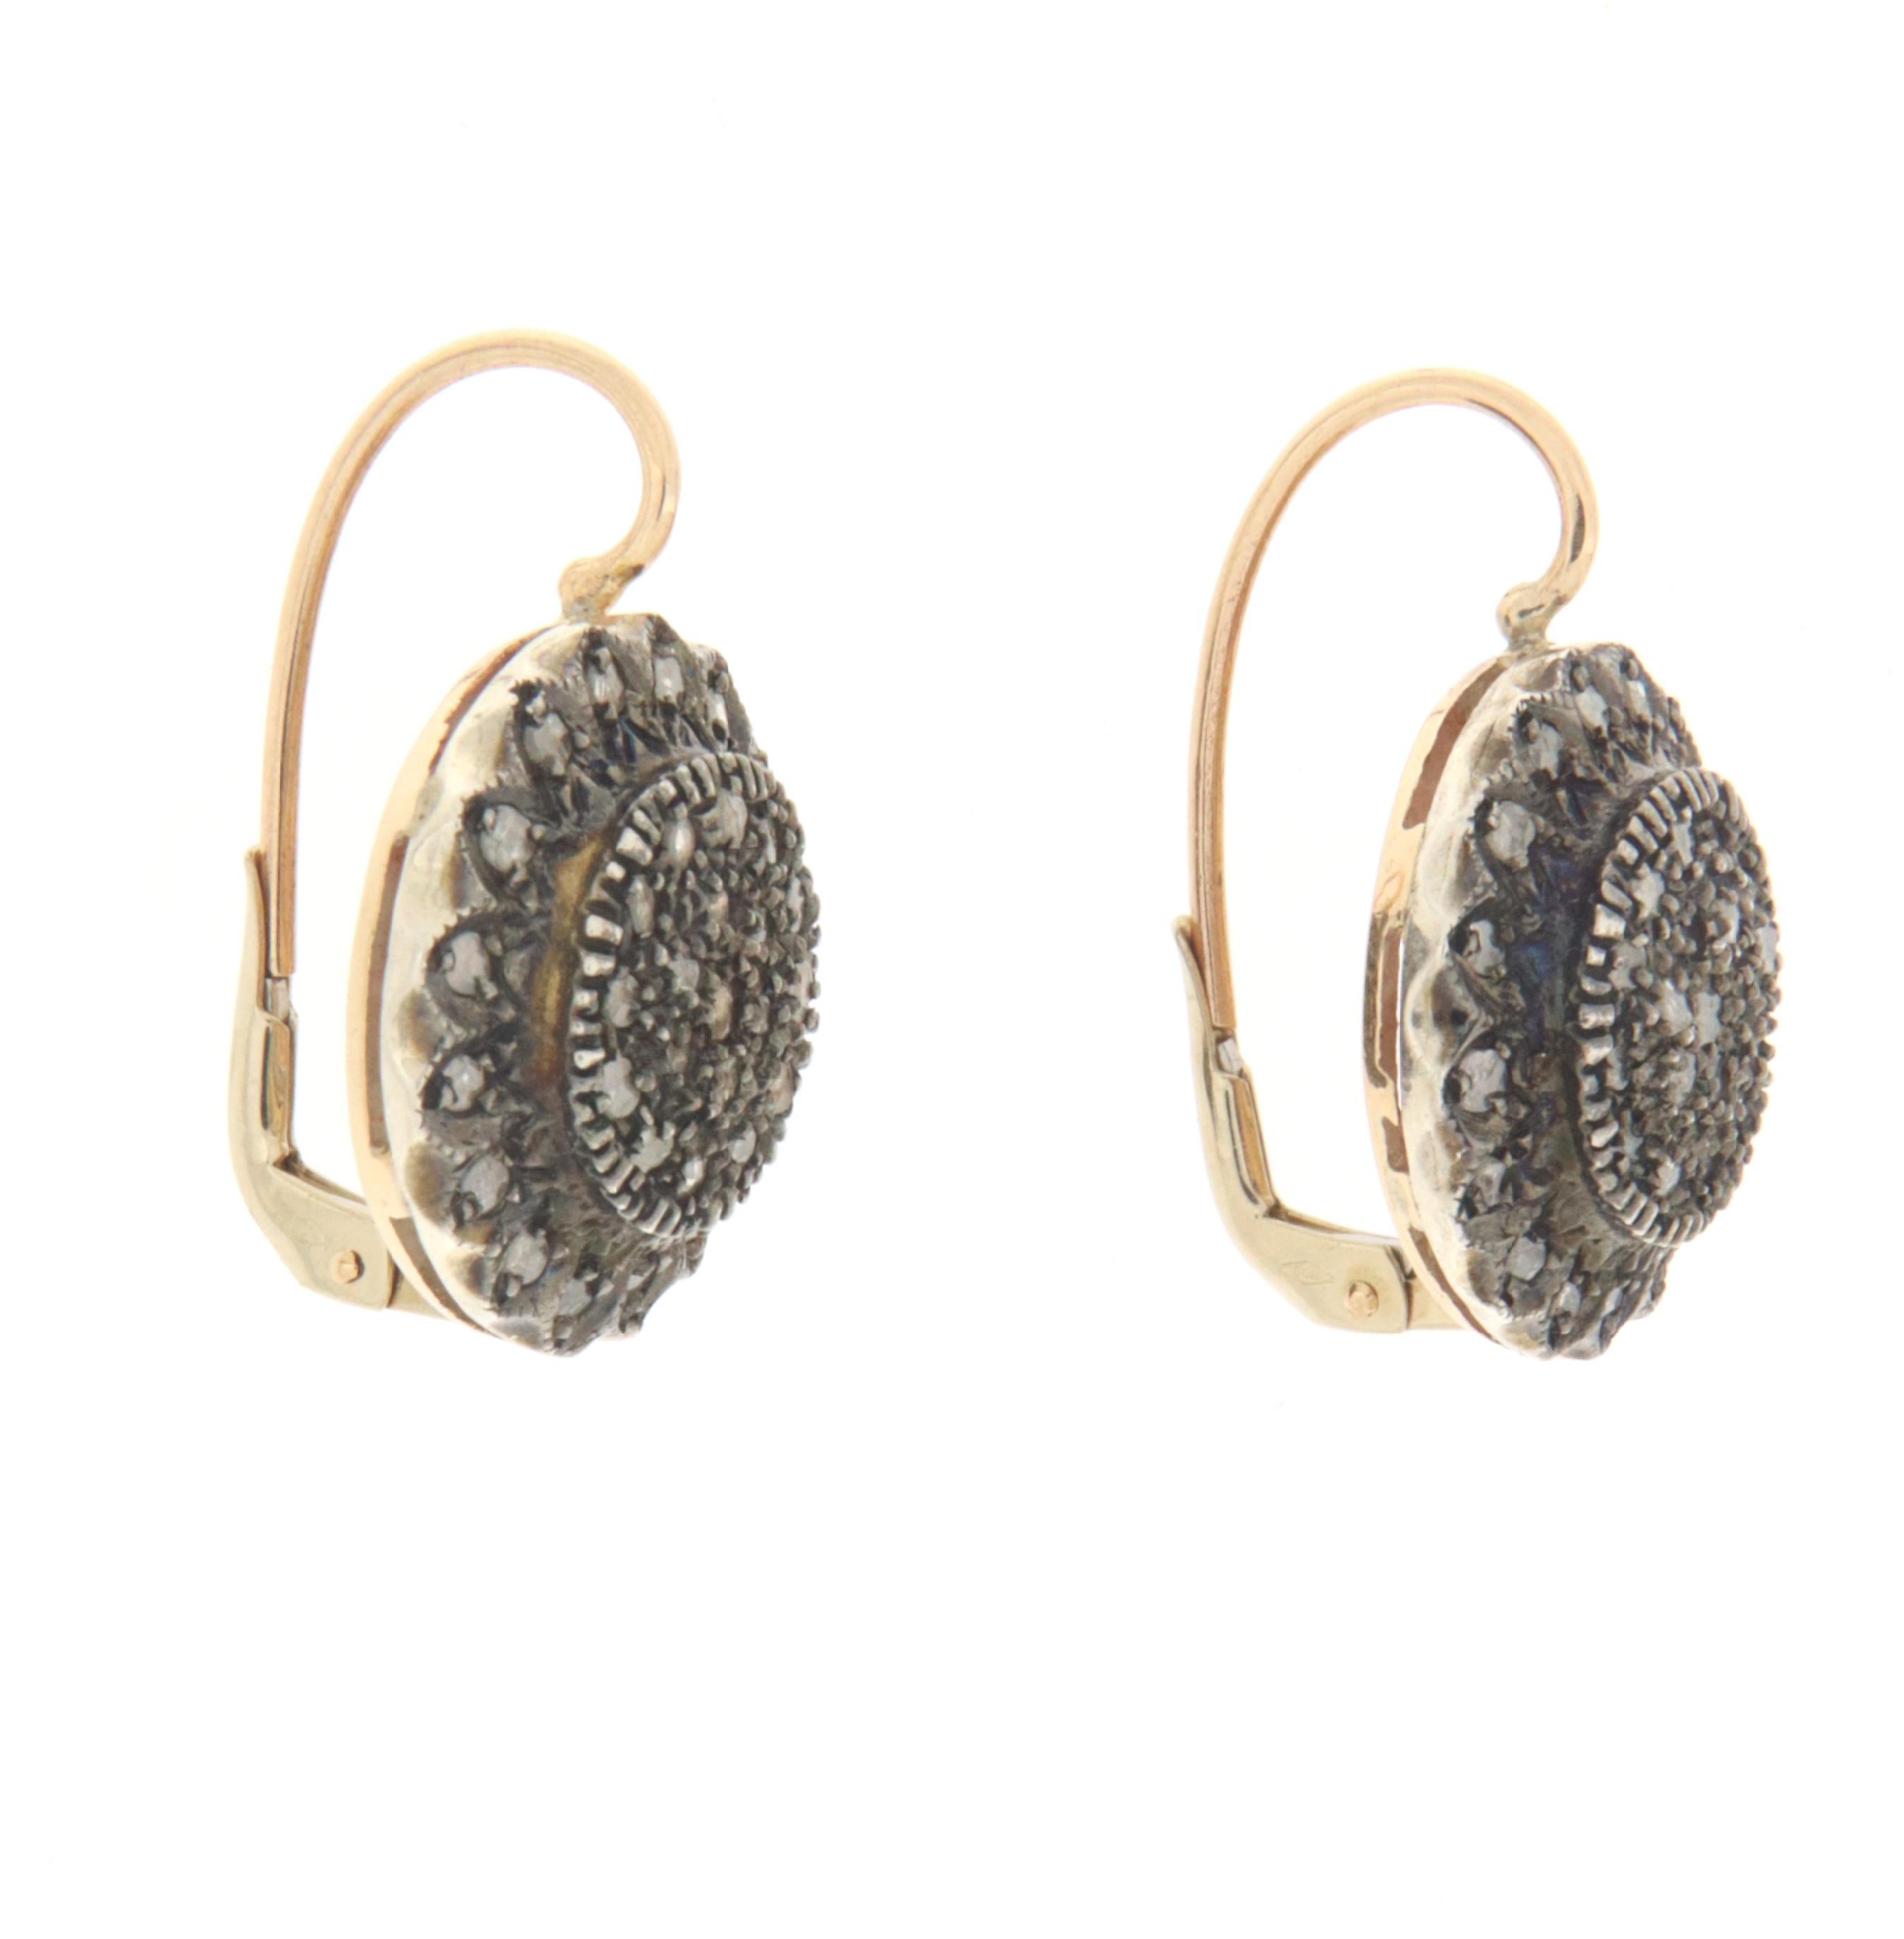 1950s
9 karat yellow gold and 800 thousandths silver stud earrings. Handmade by artisans assembled with old cut diamonds.

Earrings total weight 12.30 grams
Old Cut Diamonds weight 1.12 karat
(ring is not included in the price)